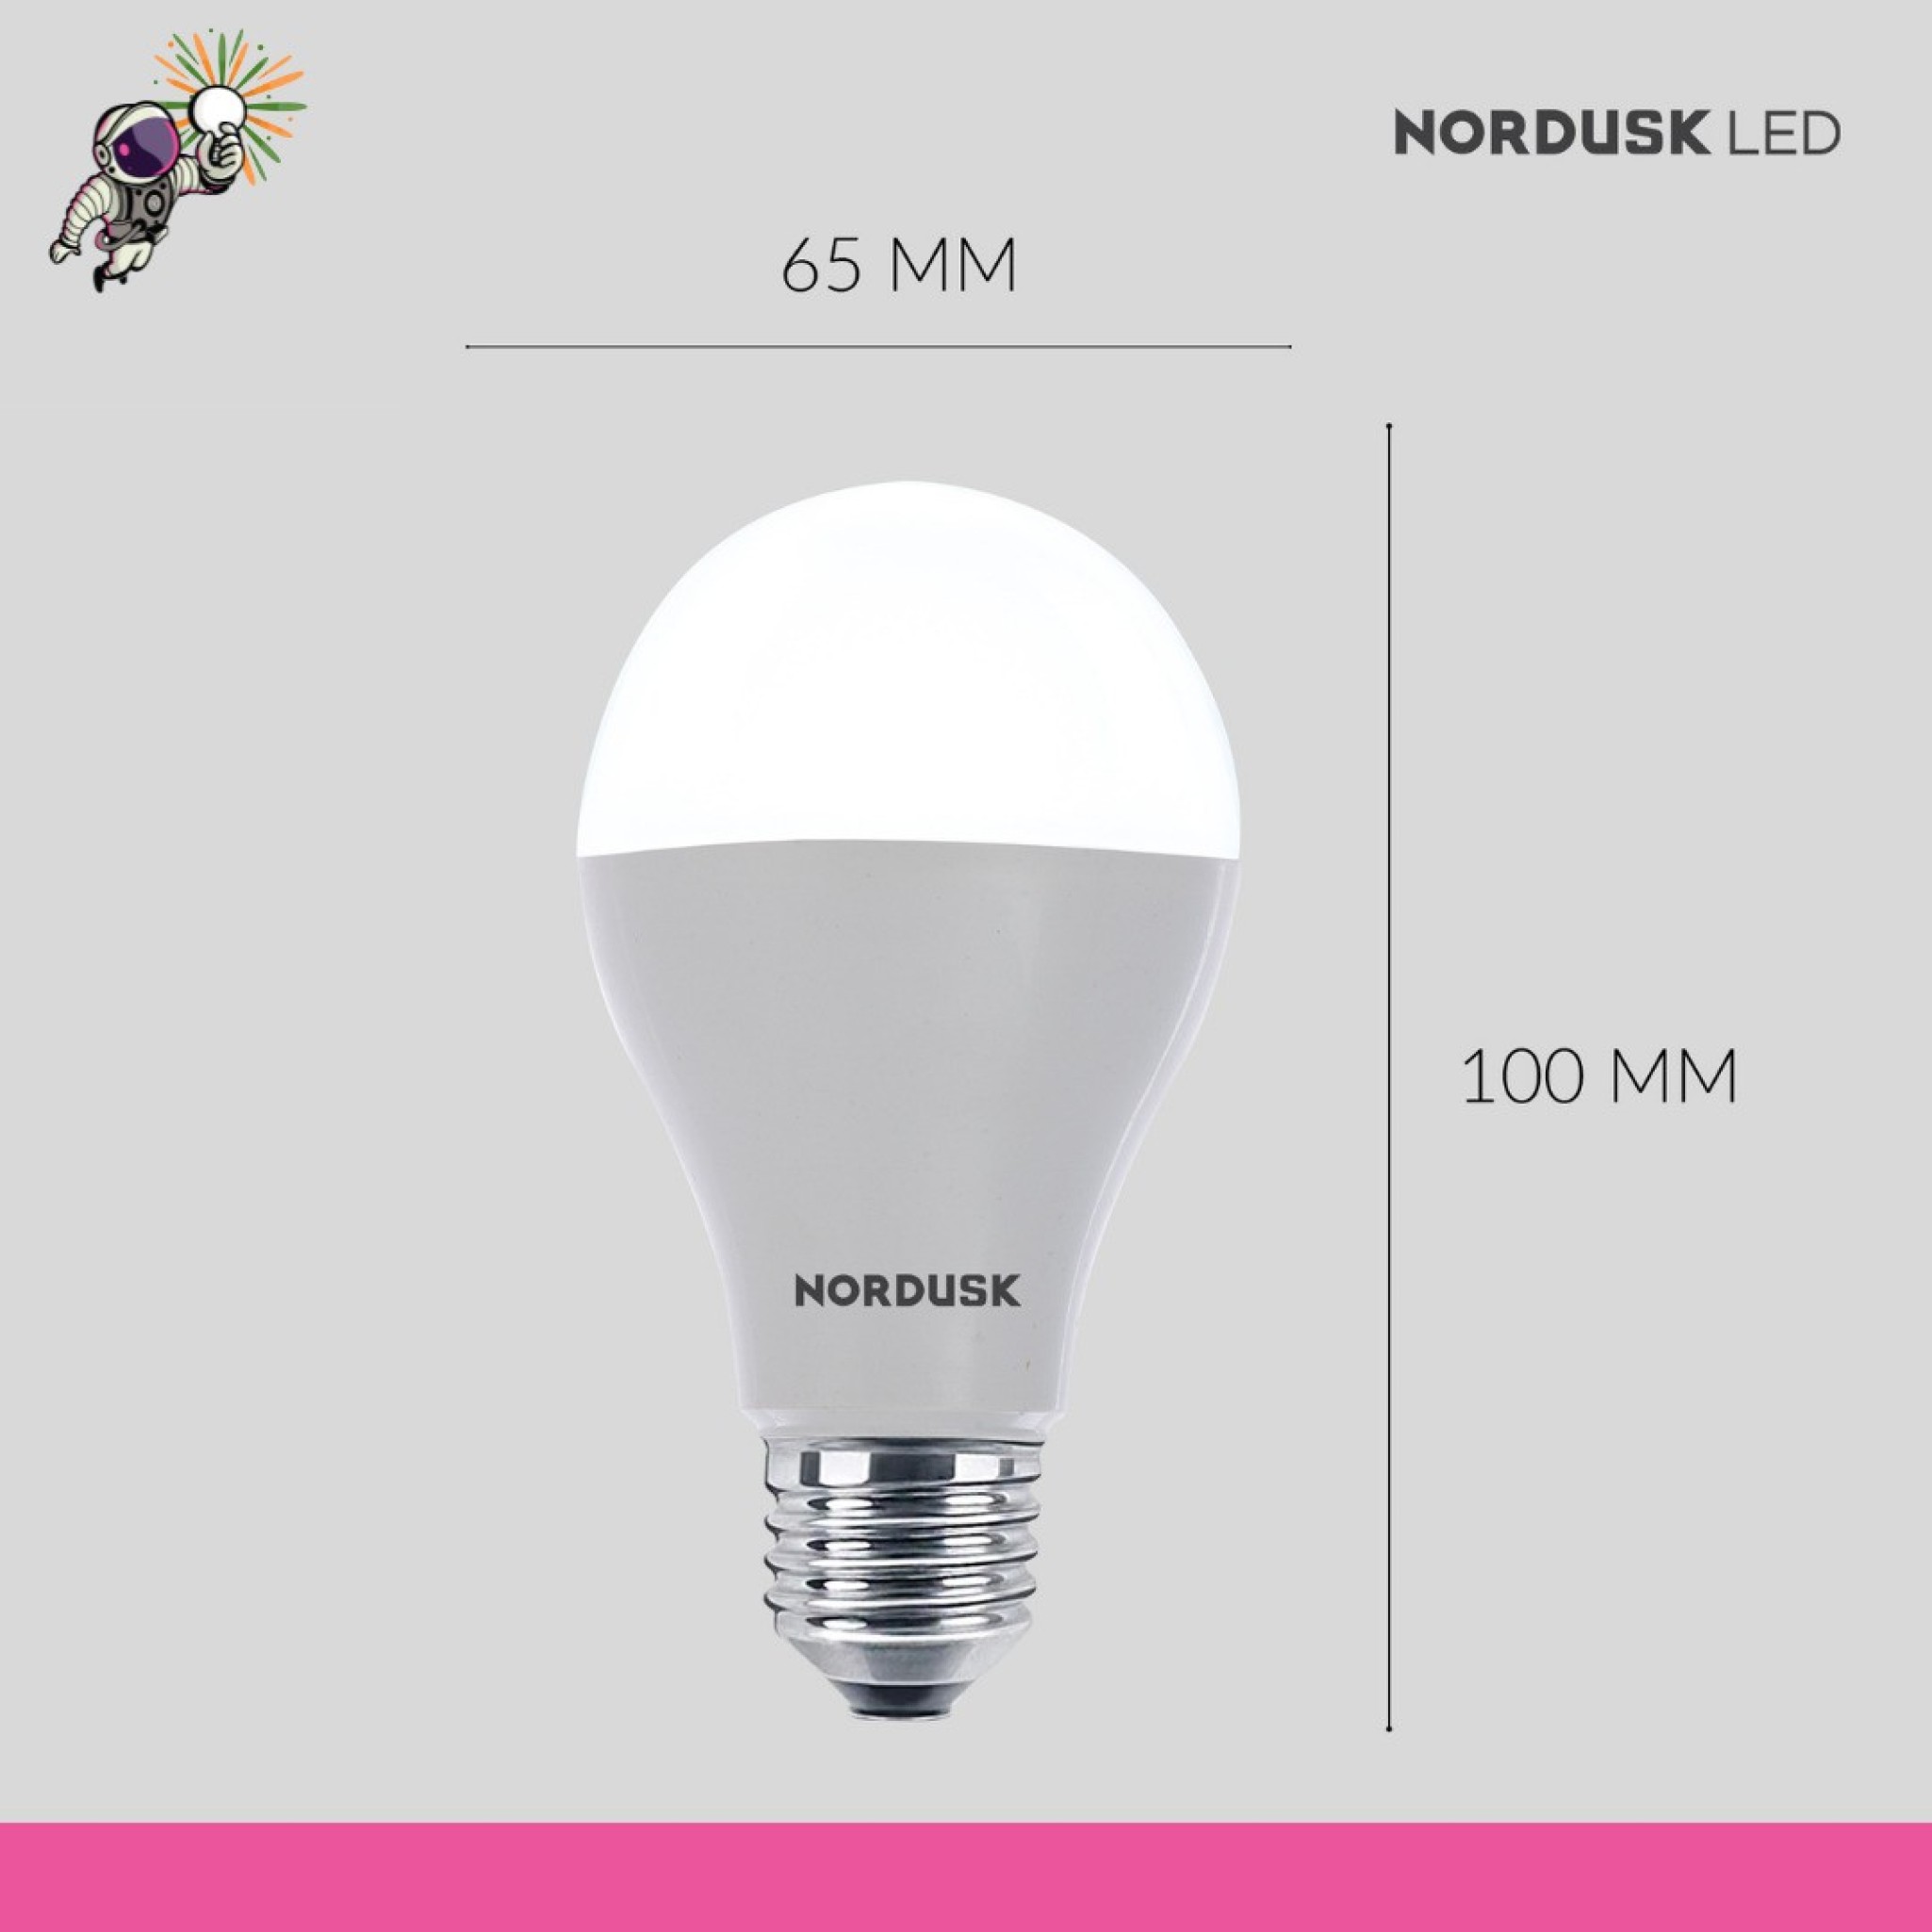 NORDUSK 15 W Round B22 LED Bulb Price in India - Buy NORDUSK 15 Round B22 LED Bulb online at Shopsy.in